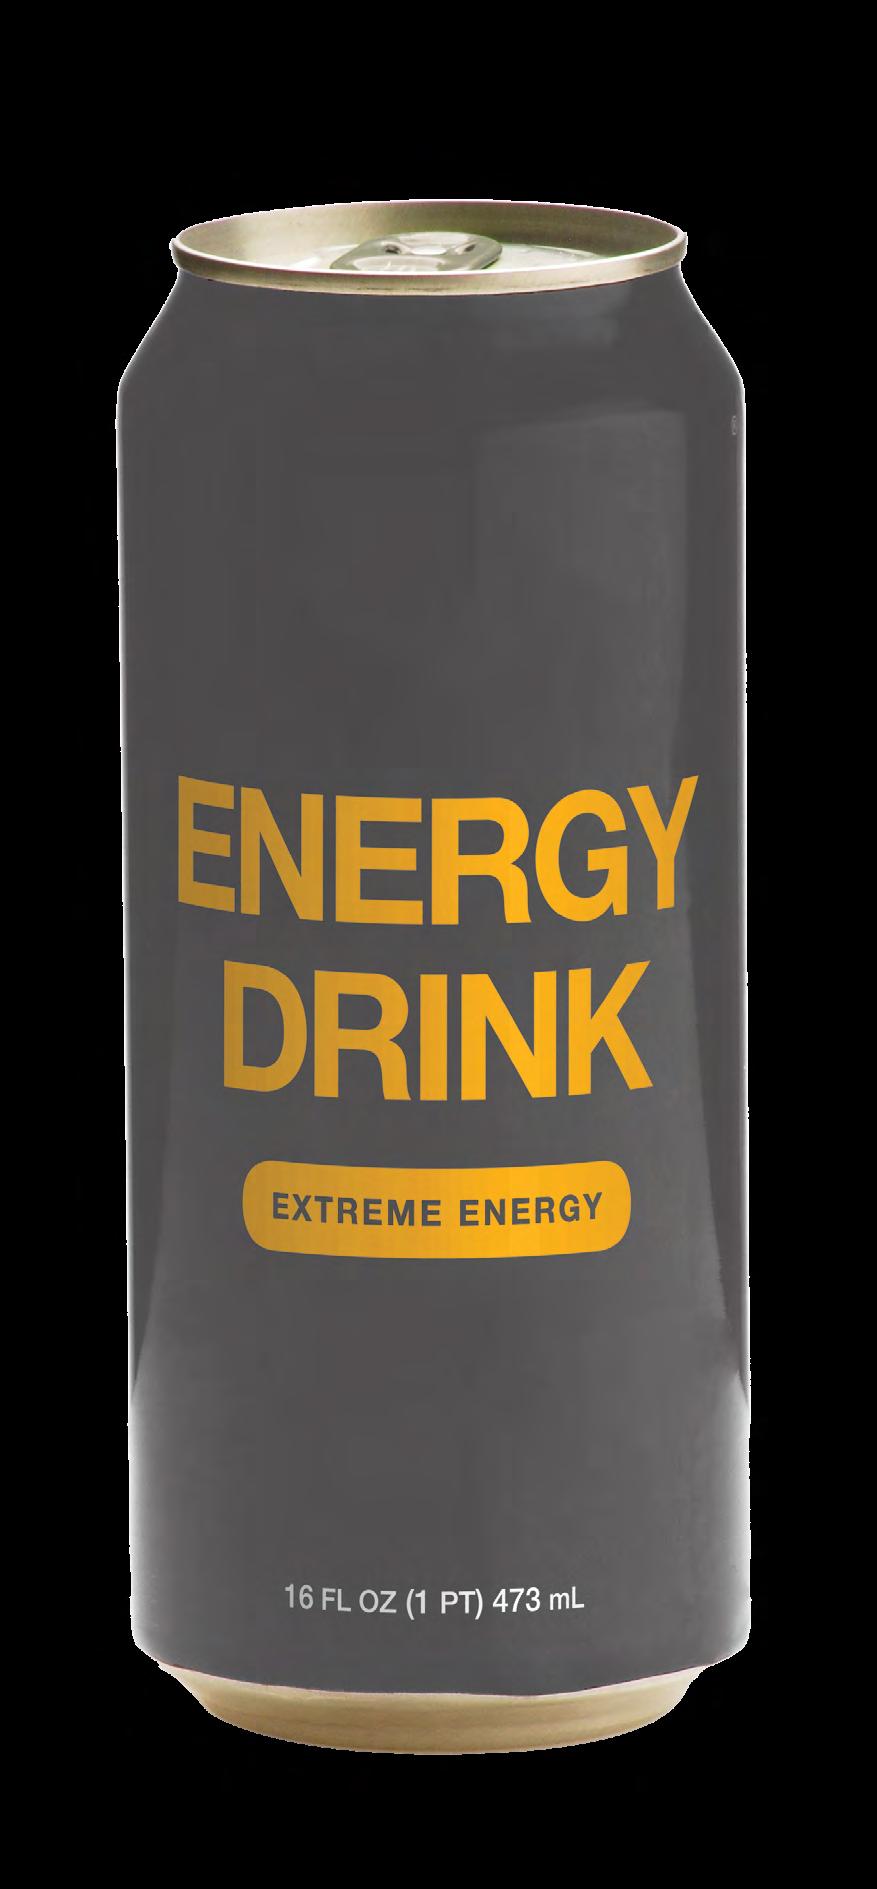 Energy Drink Servings Per Container 2 Calories 120 Calories from Fat 0 Total Carbohydrates 30g 10% Sugars 30g Riboflavin Vit B2 1.